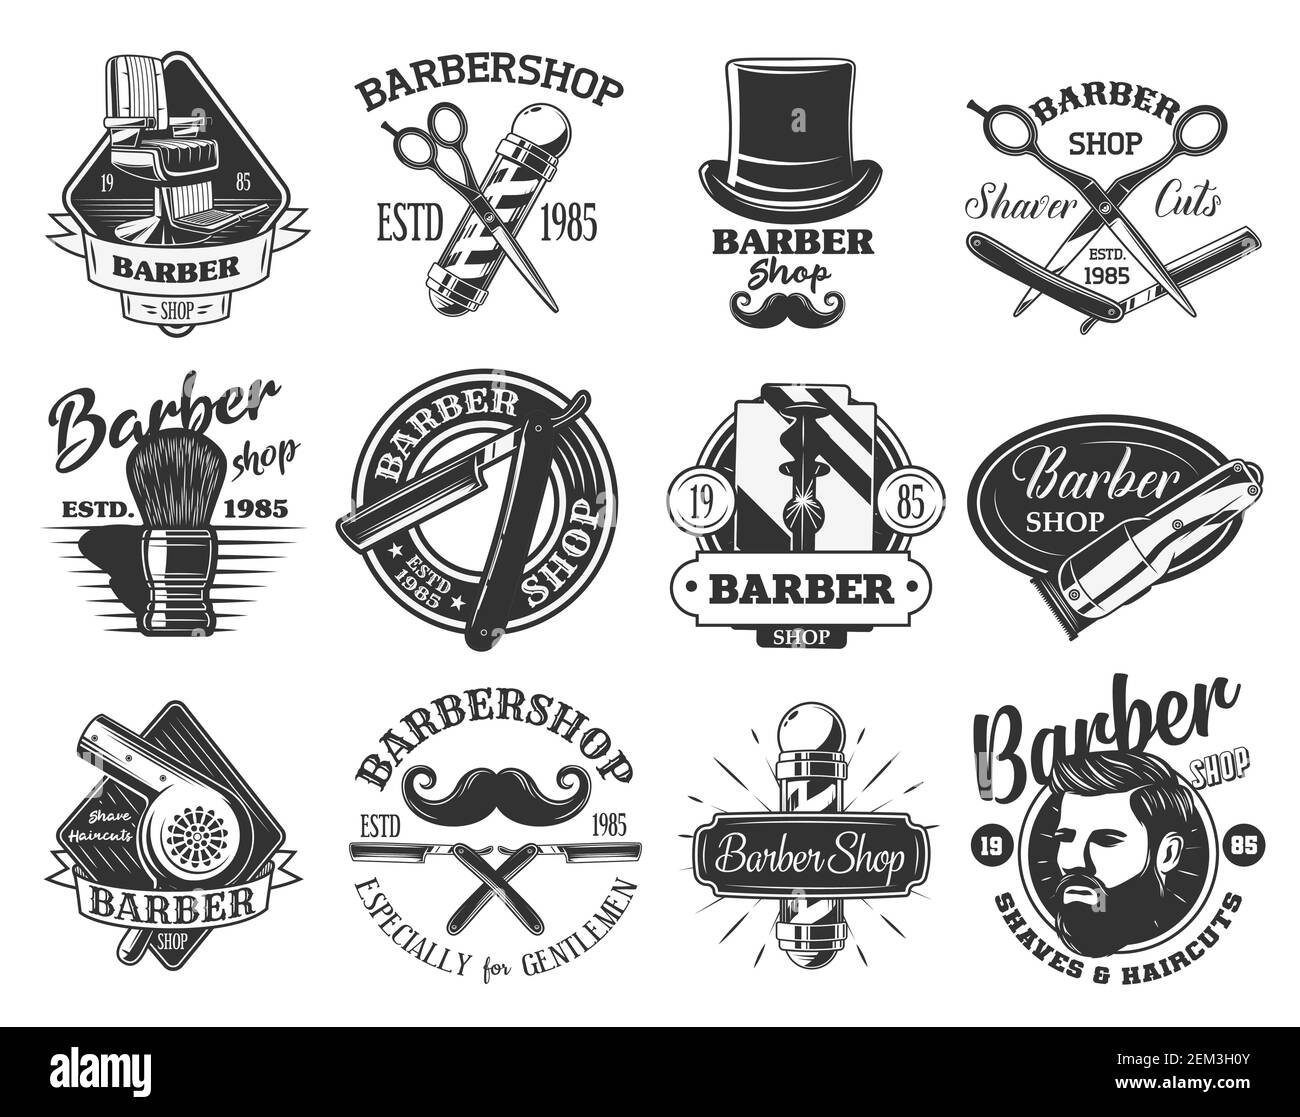 Barber shop Cut Out Stock Images & Pictures - Alamy